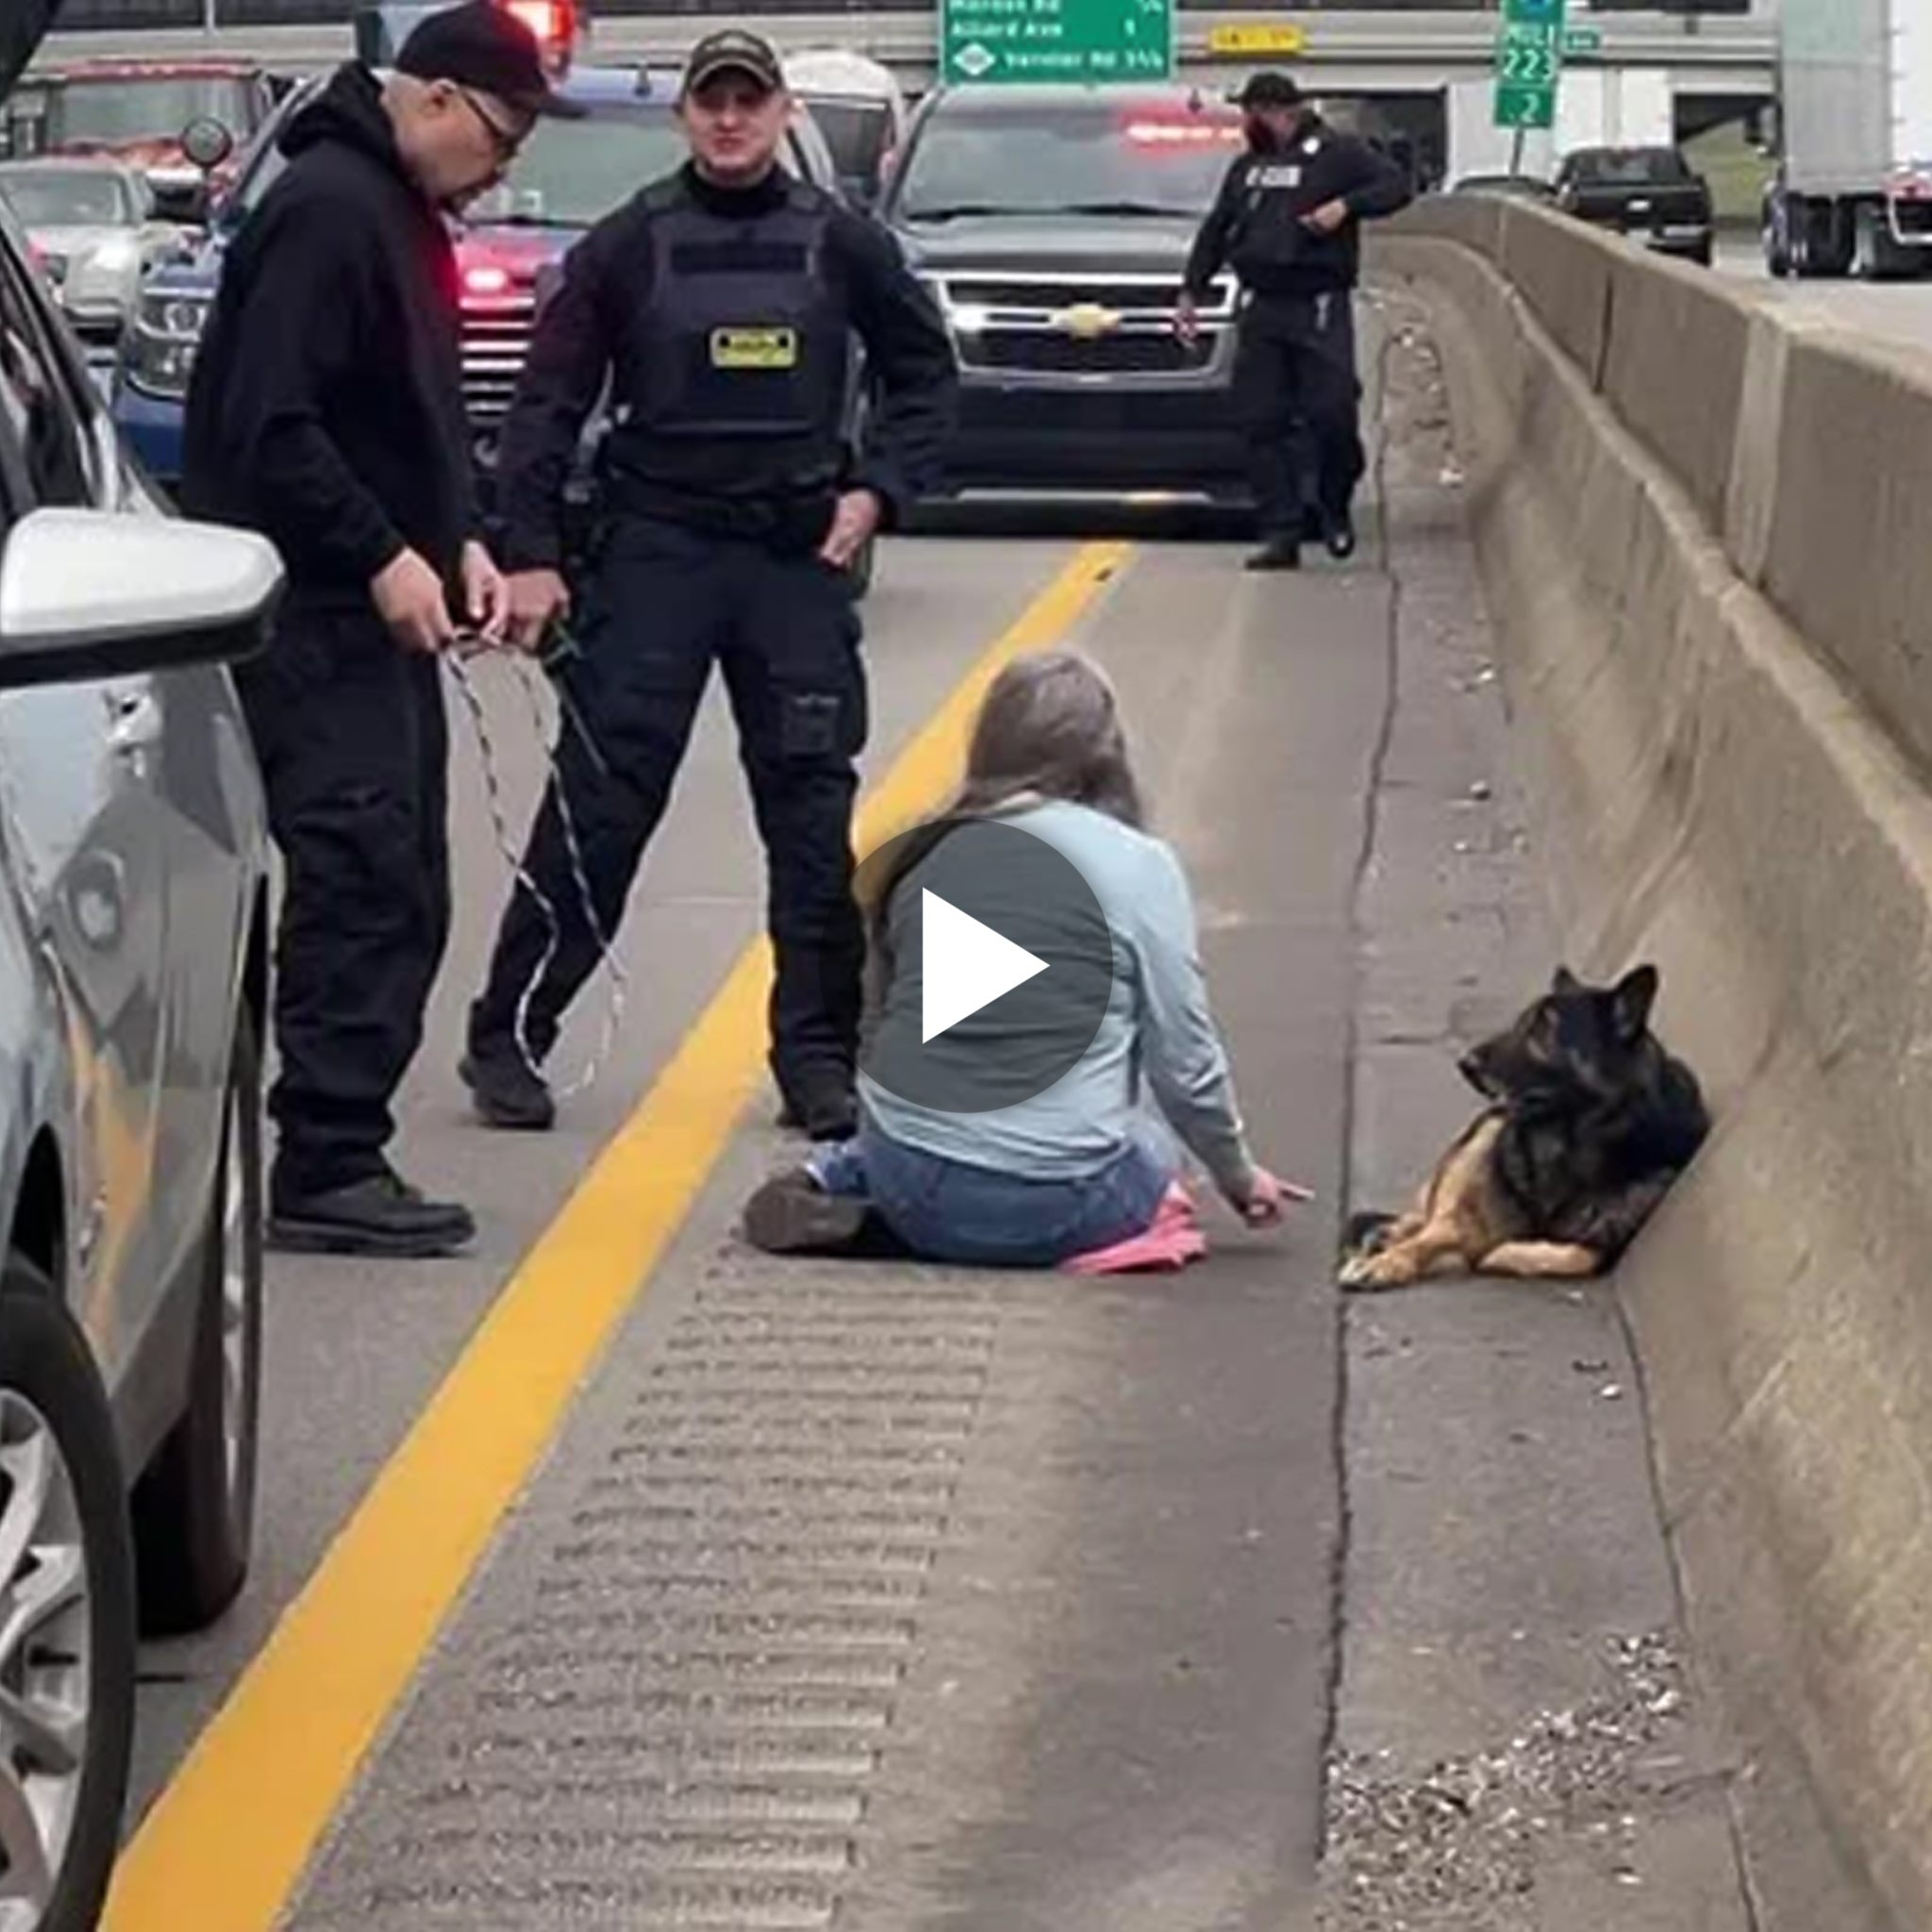 The heroic deed of compassion by a U.S. woman who stops traffic on a highway to save a wounded dog highlights the extraordinary lengths we go to in order to protect our beloved four-legged friends.